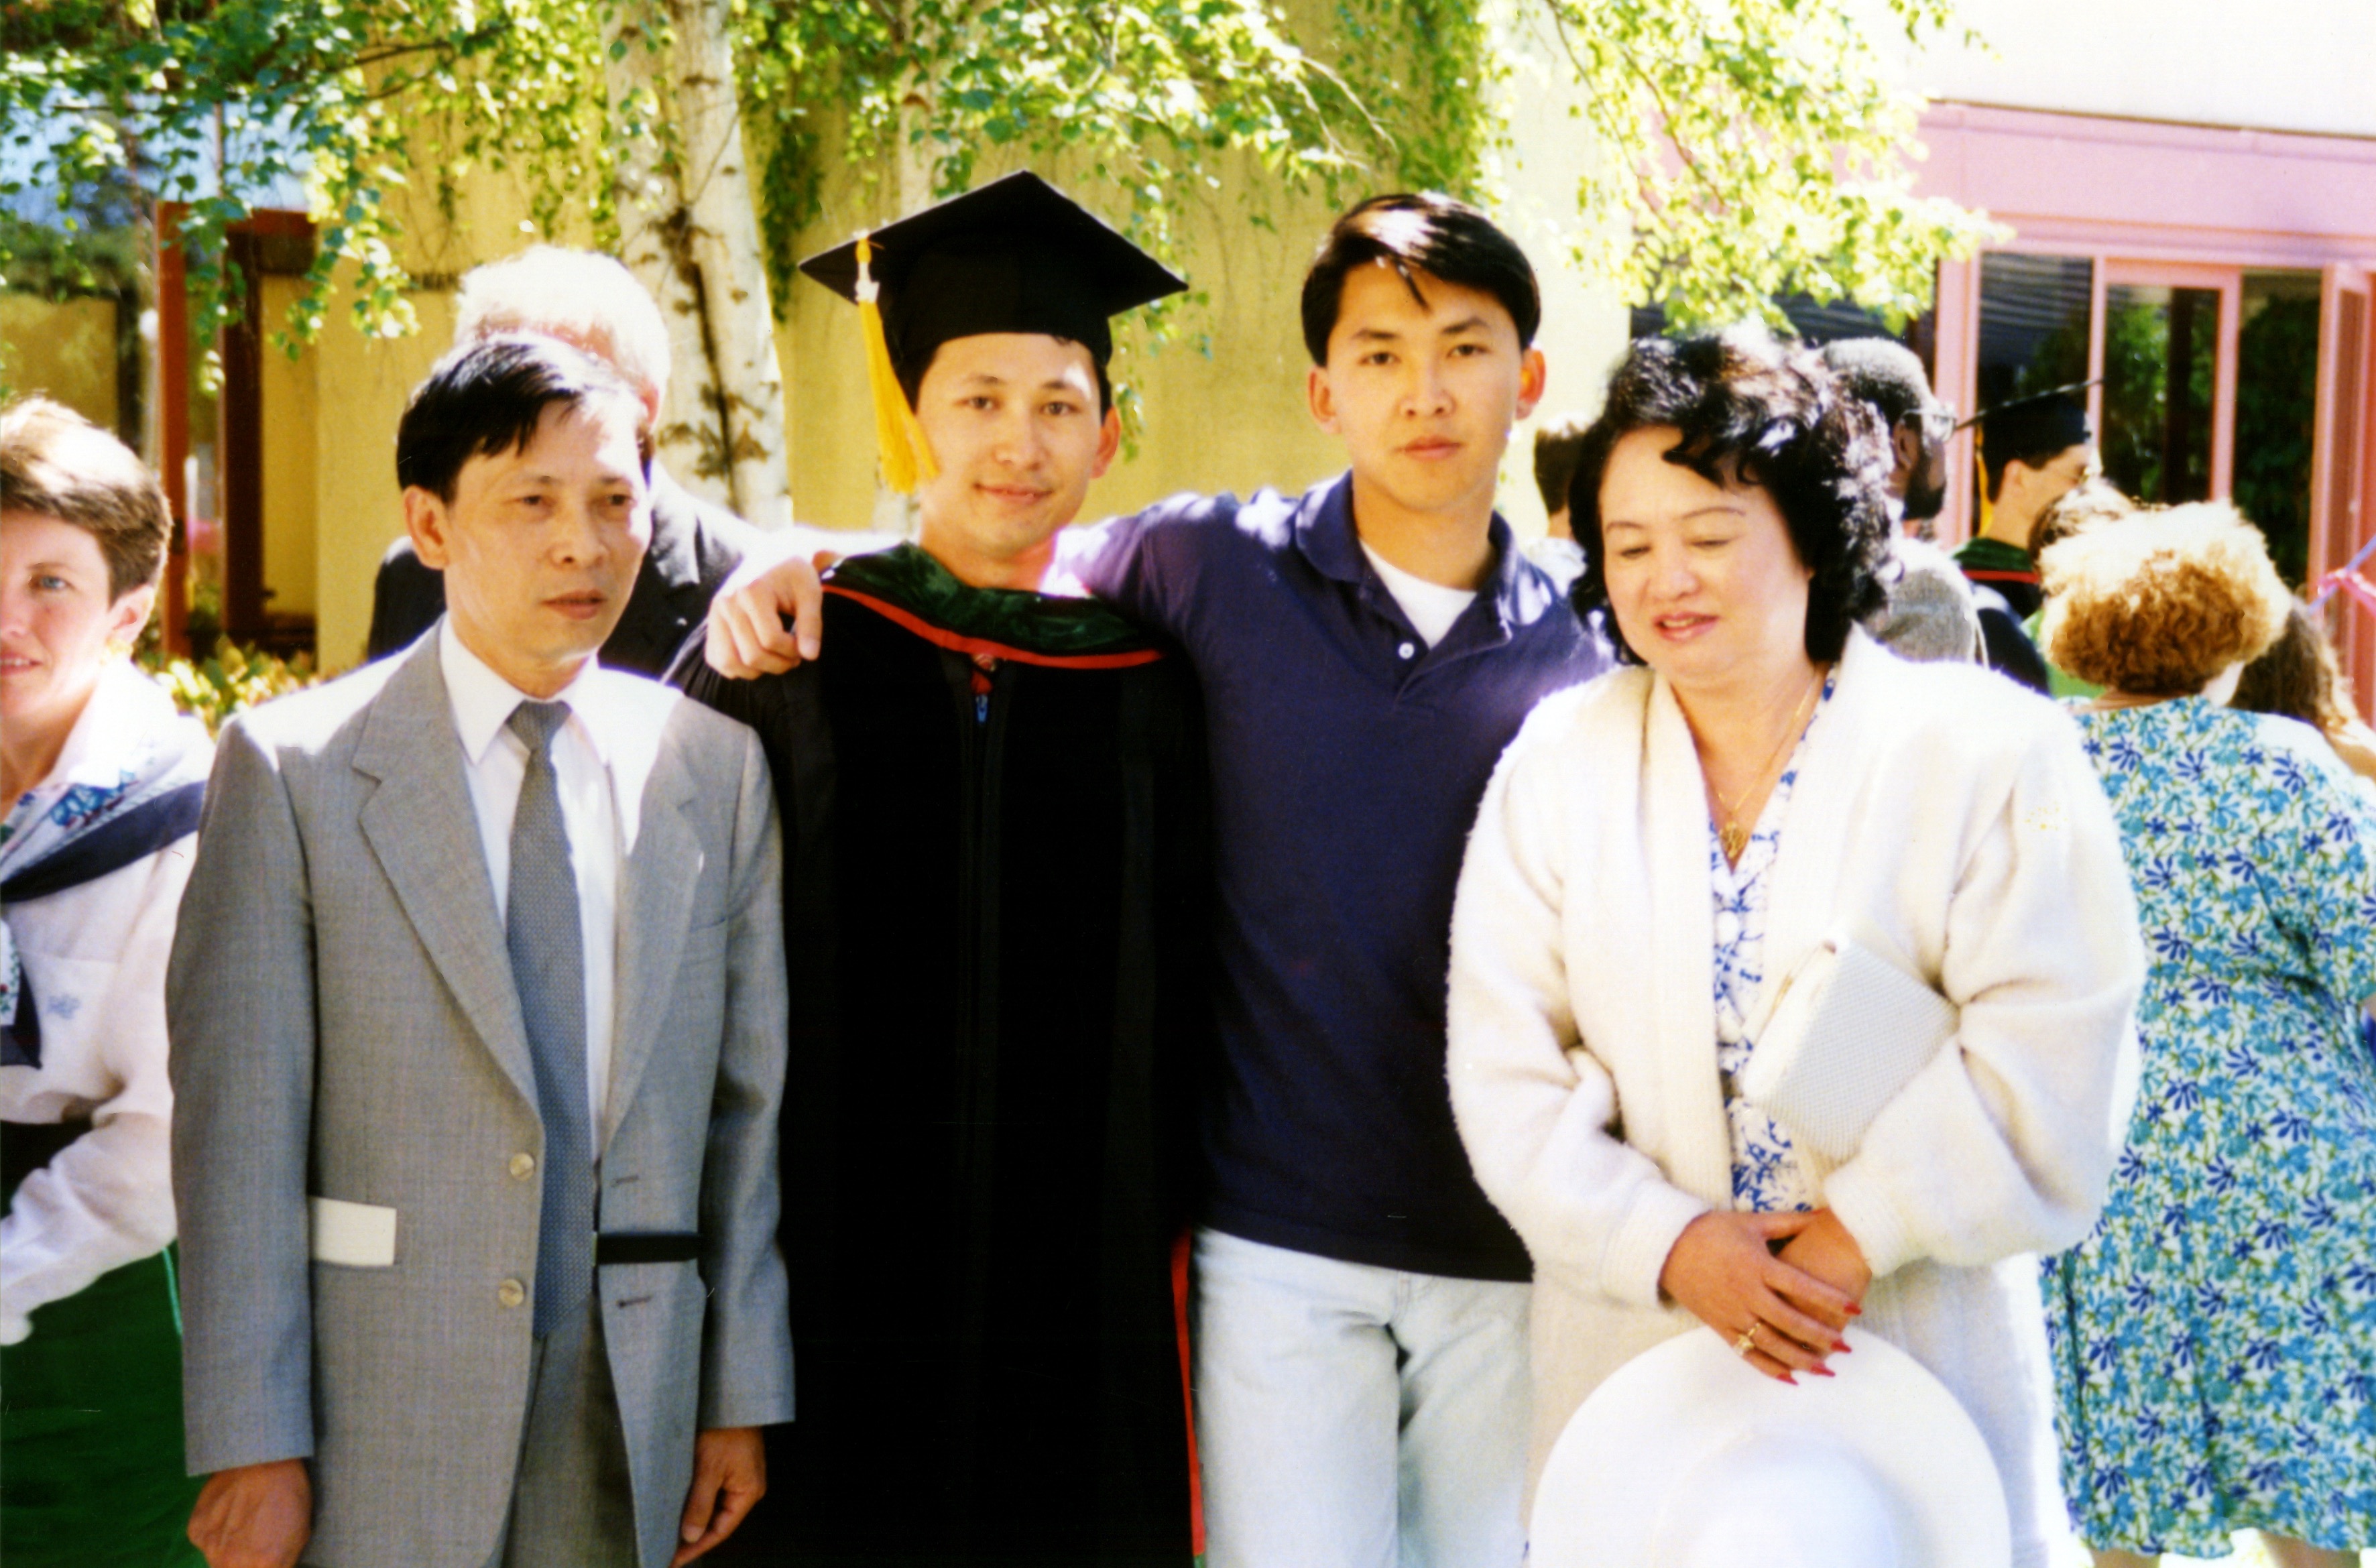 Tung with parents and brother